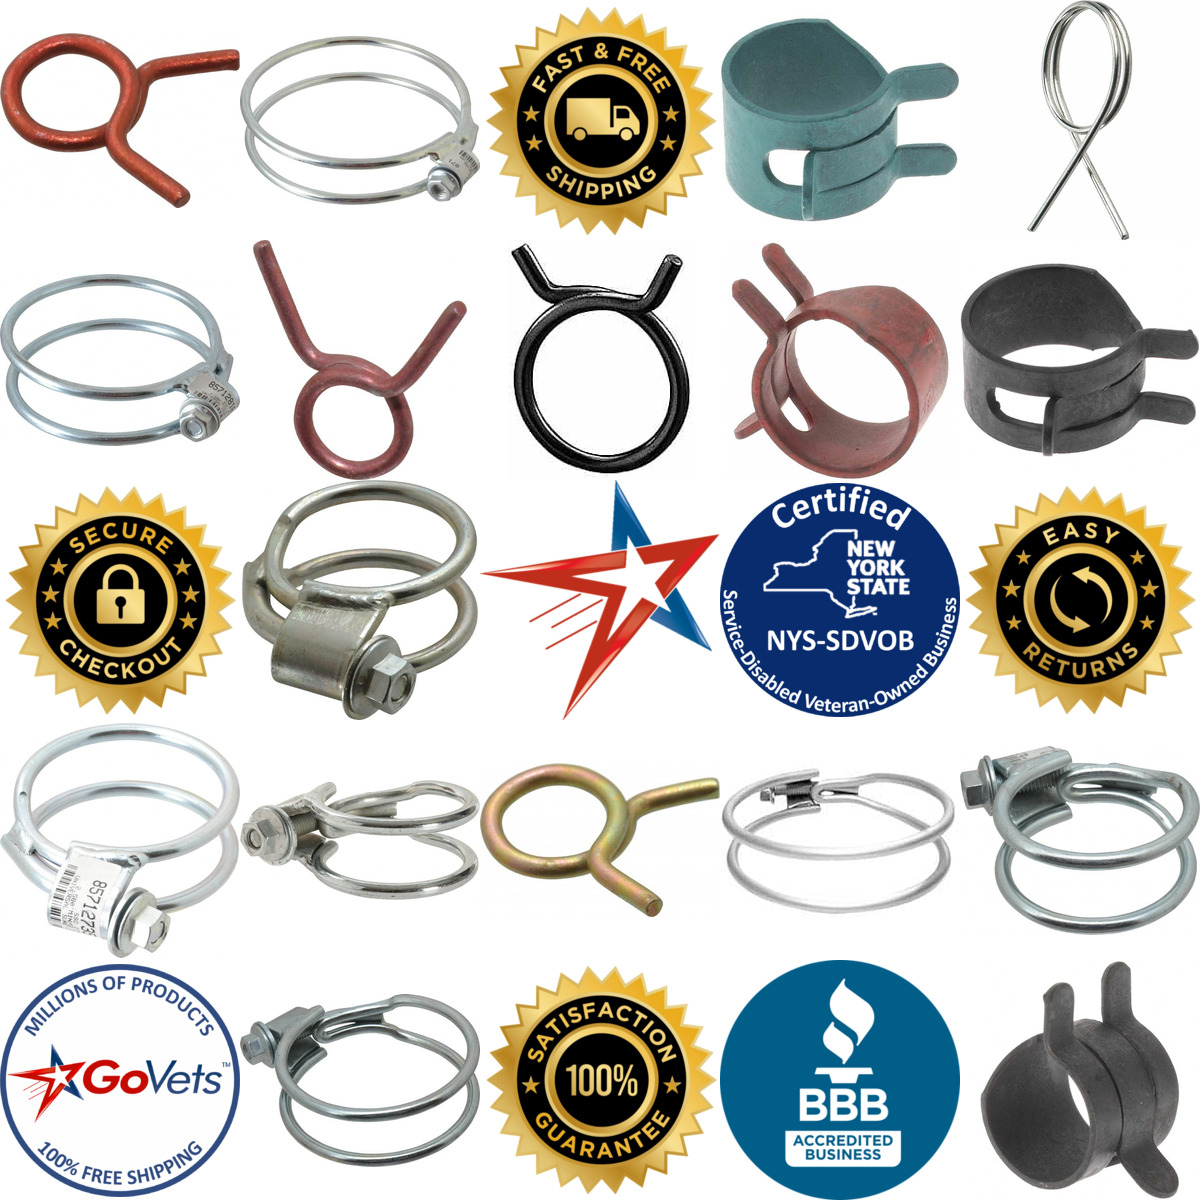 A selection of Wire Clamps products on GoVets